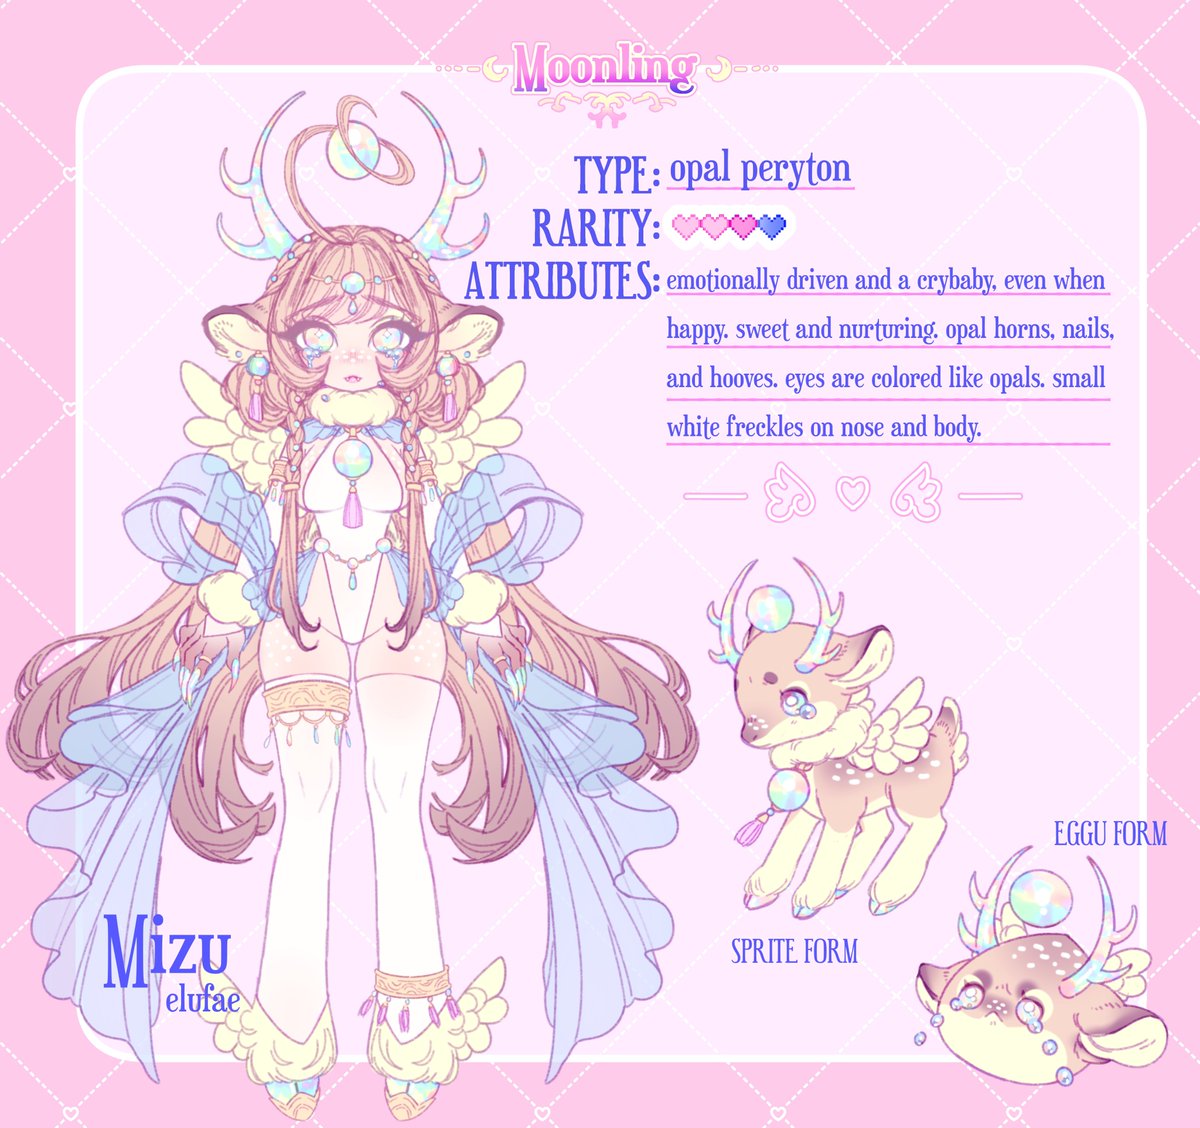 My moonling, Mizu (still trying to think of a better name, but Mizu might stick at this point lmao) for @fiyunae's community event! Had loads of fun designing her and seeing everyone's amazing designs!